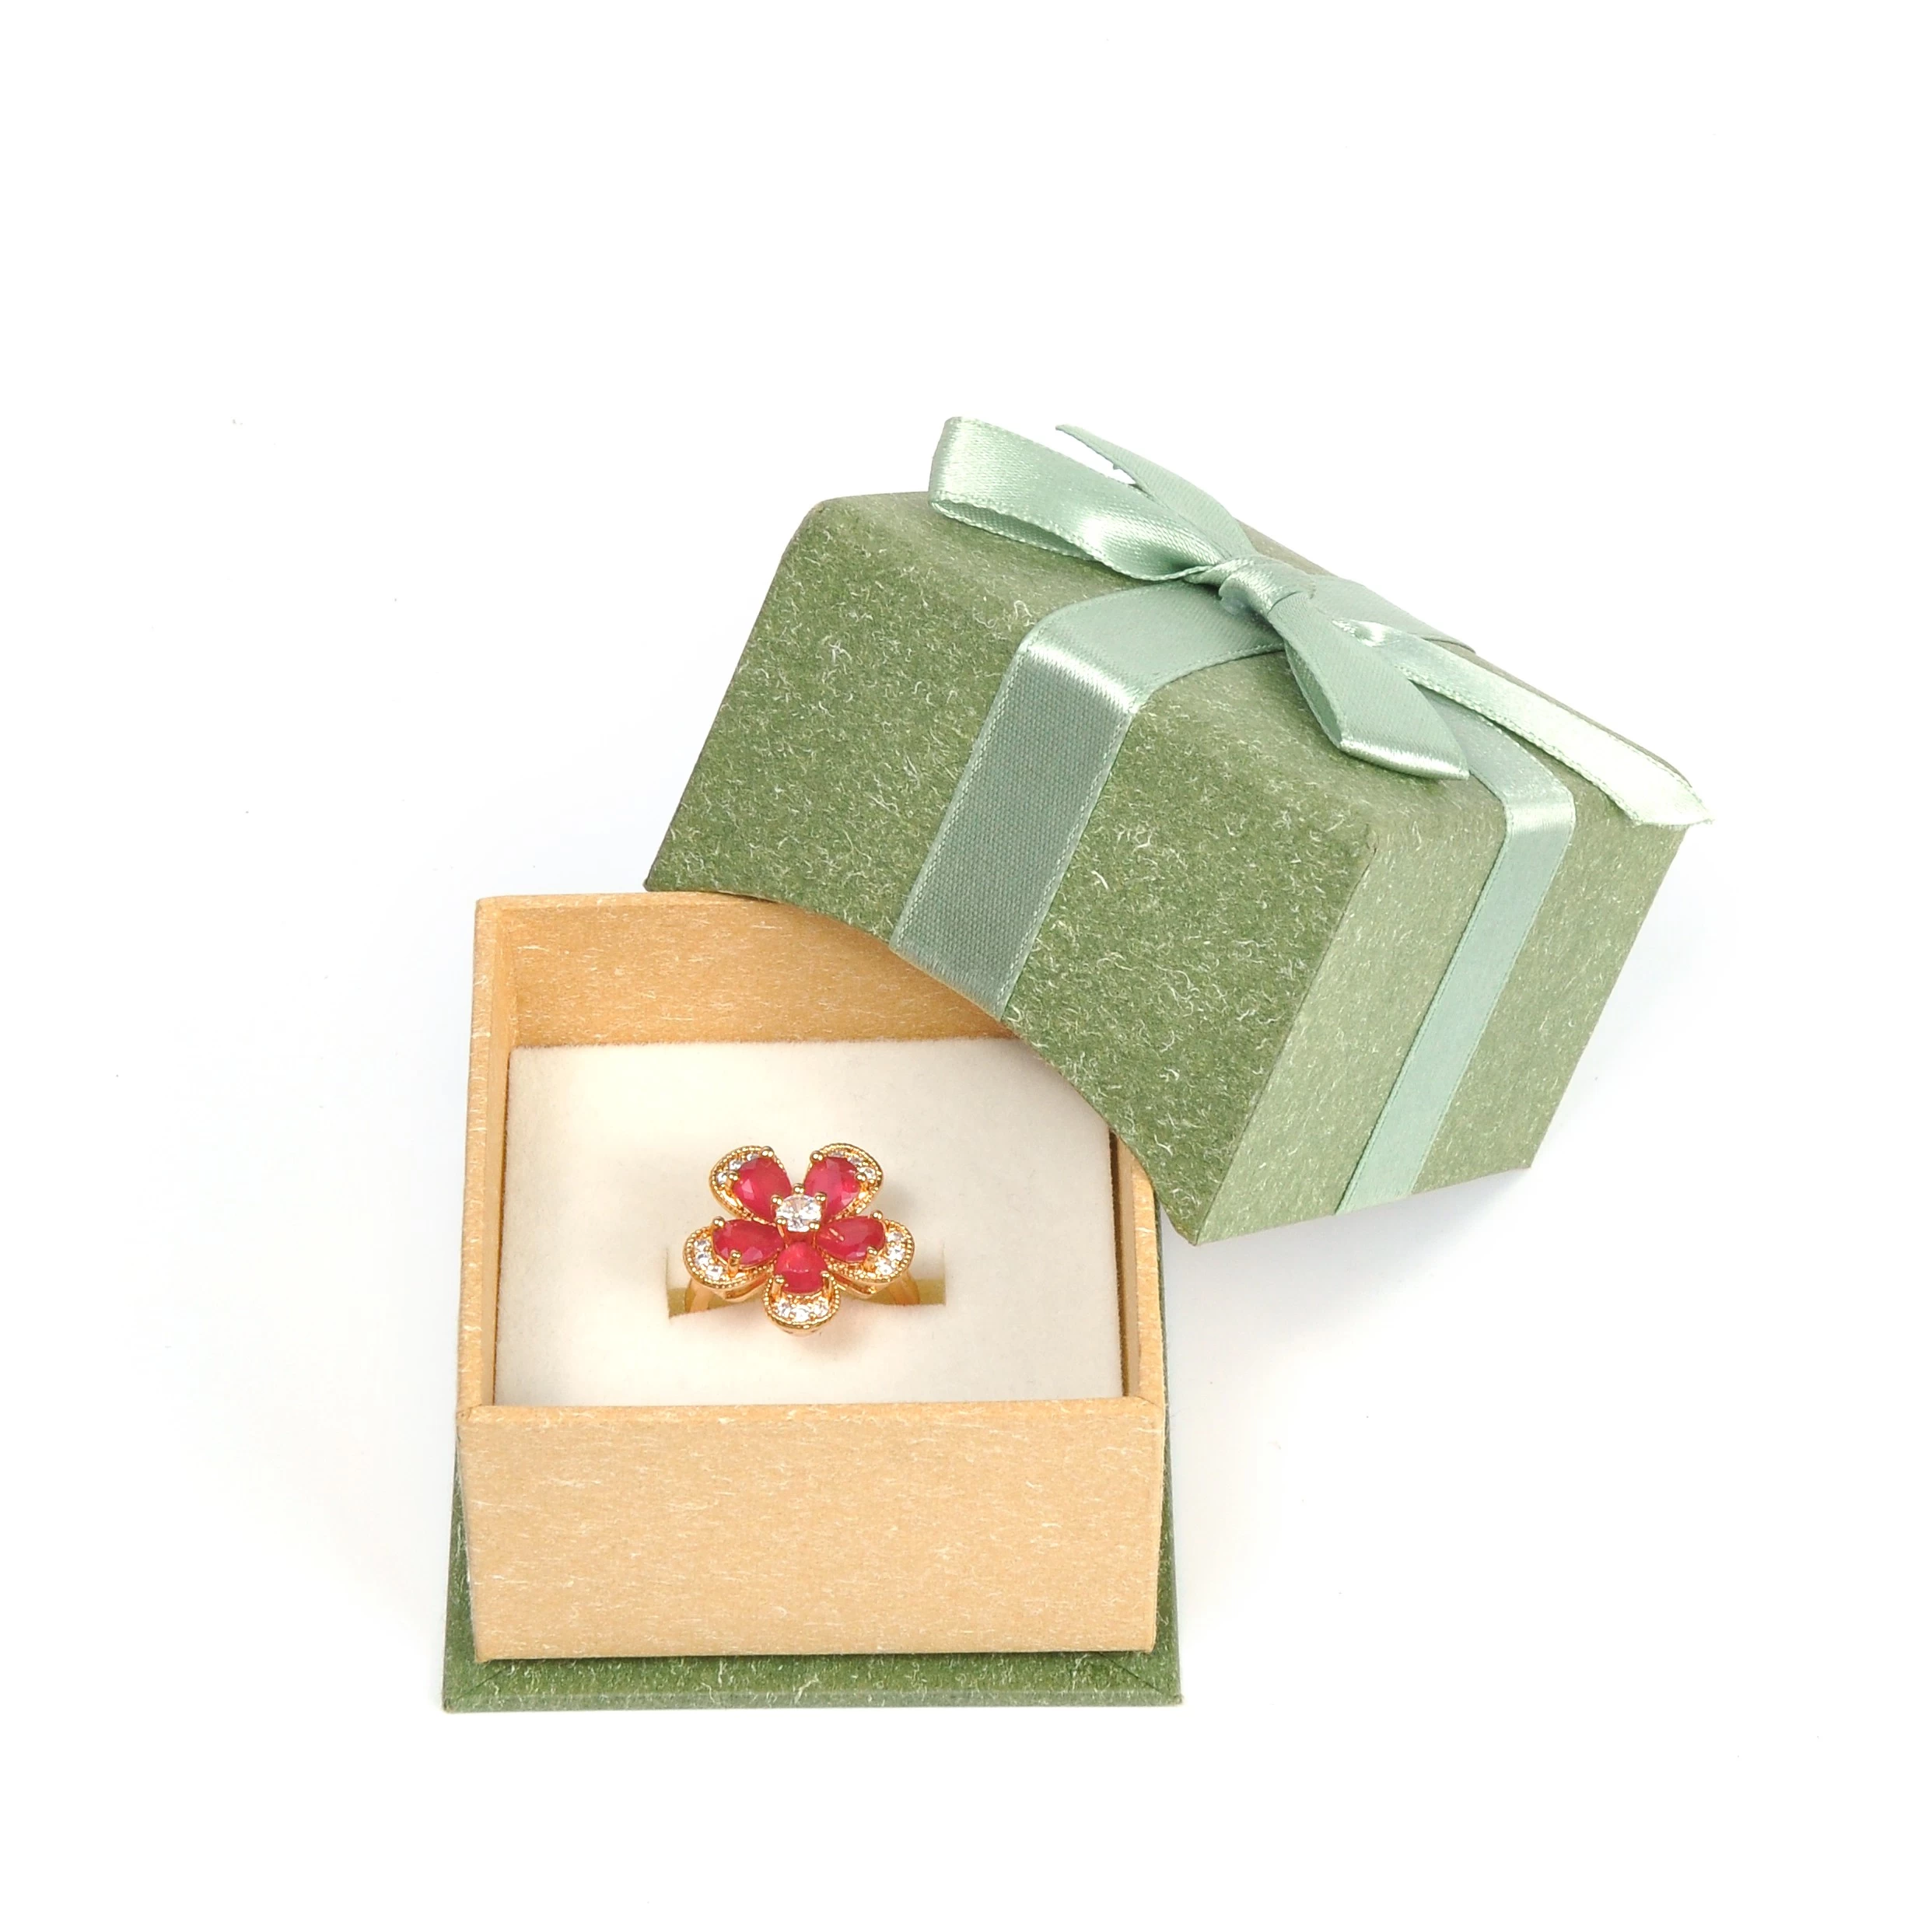 Yadao jewelry packaging produce paper box